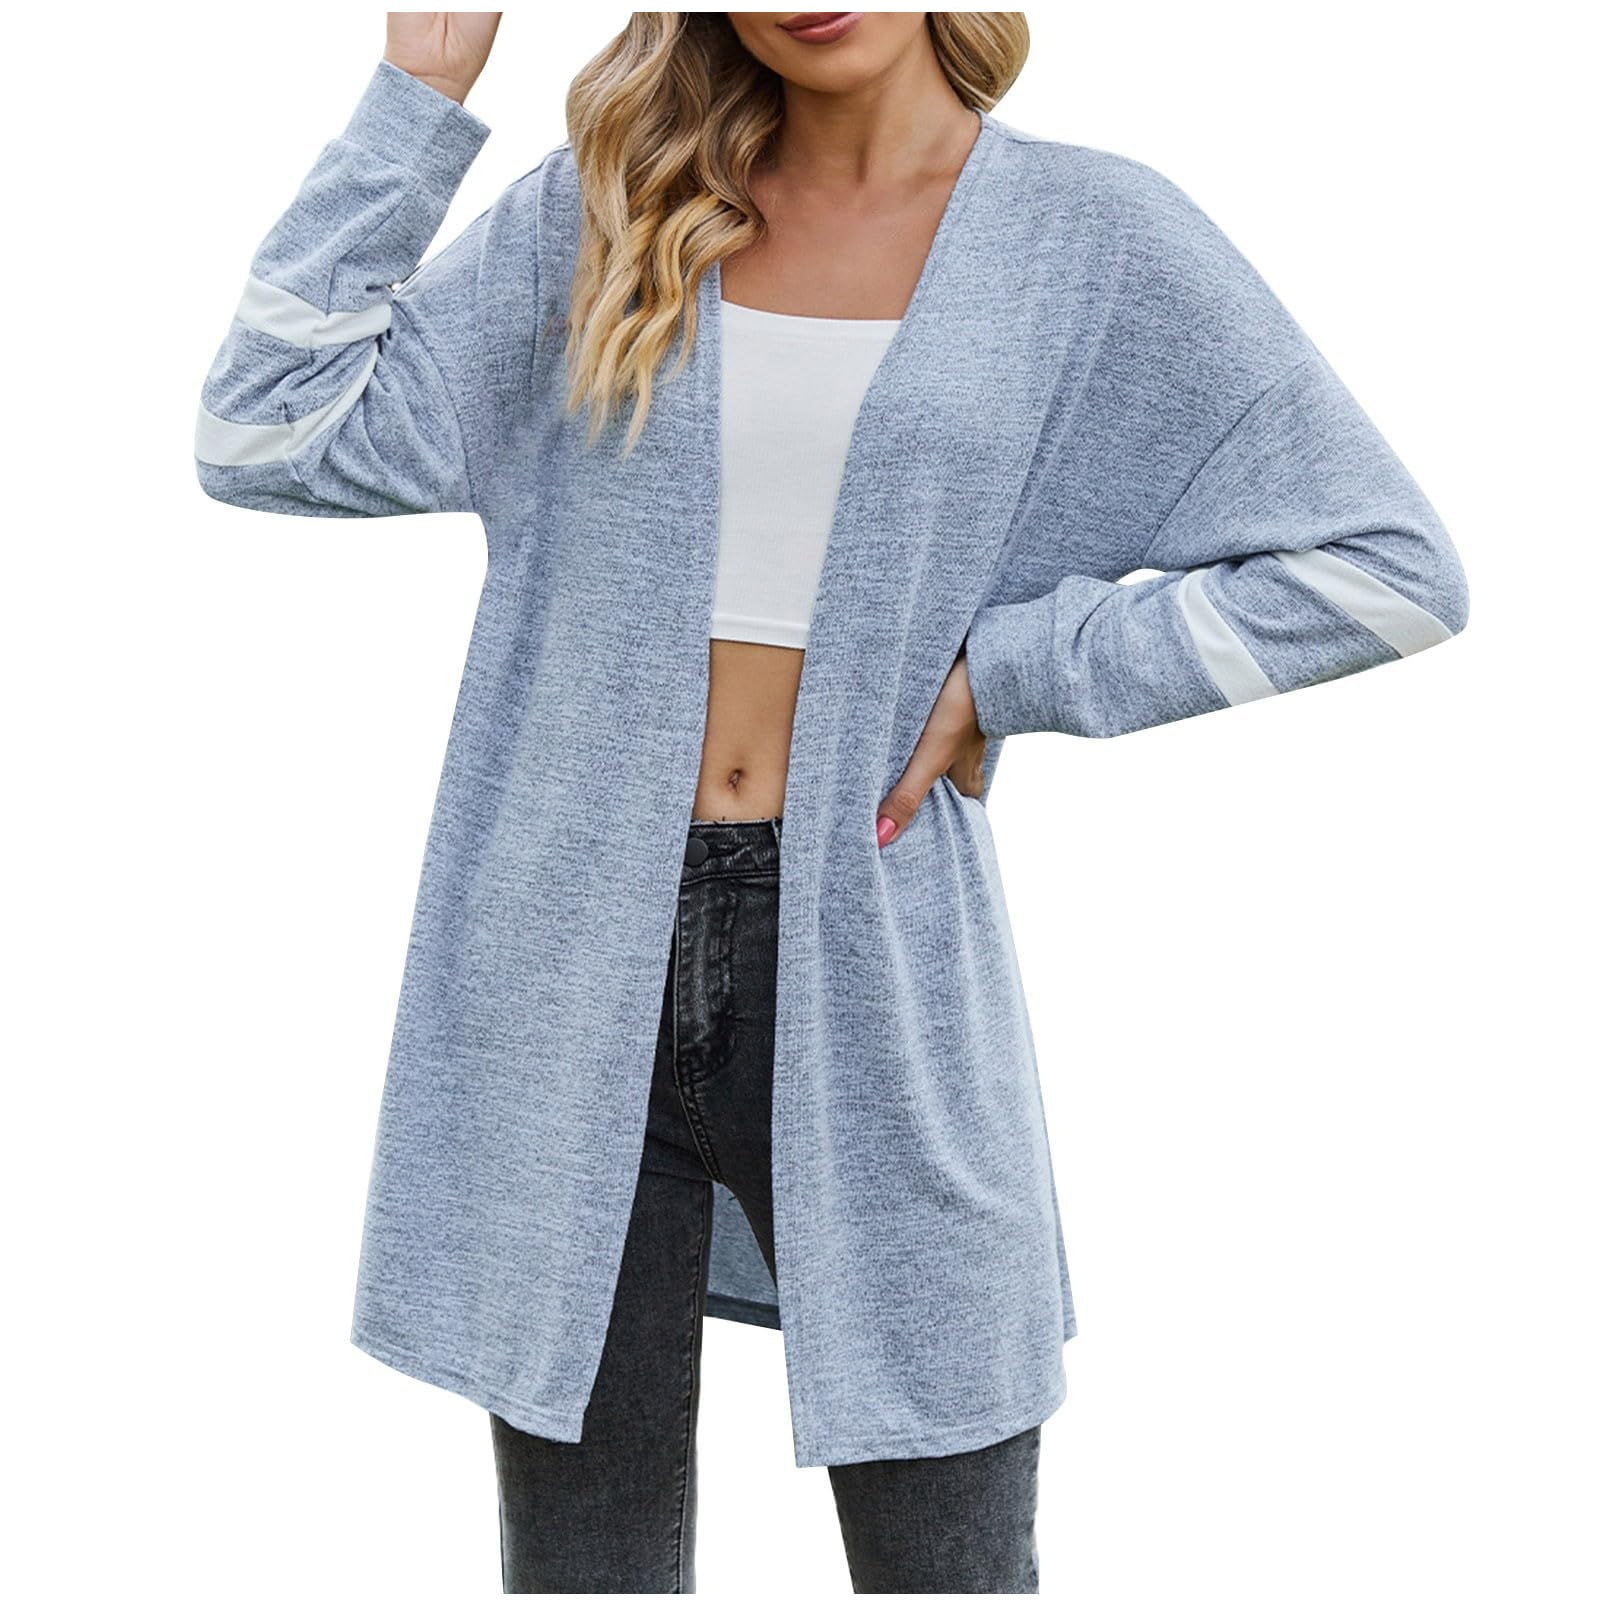 Cardigan Sweaters for Women, Women's Fashion Solid Color Splicing Long ...